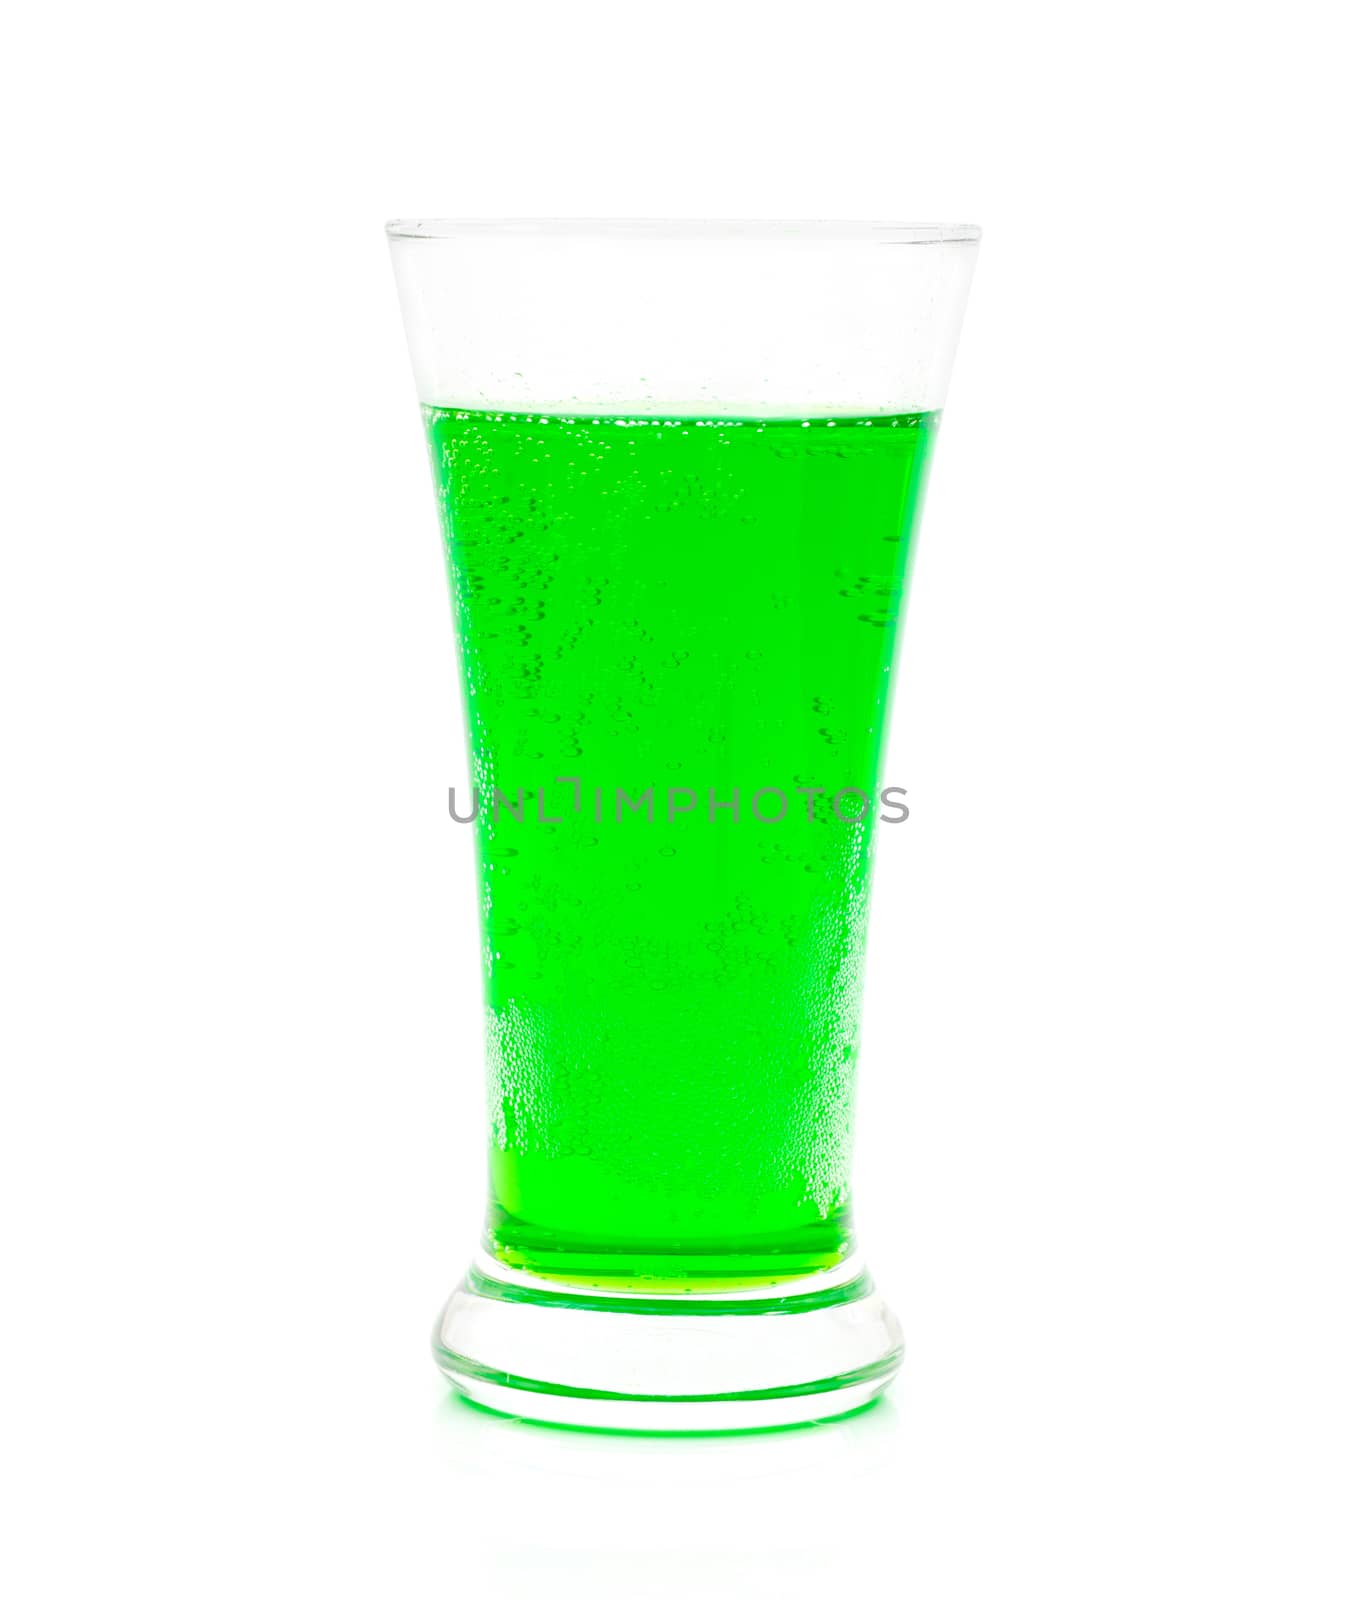 Green sparkling water in a glass on a white background